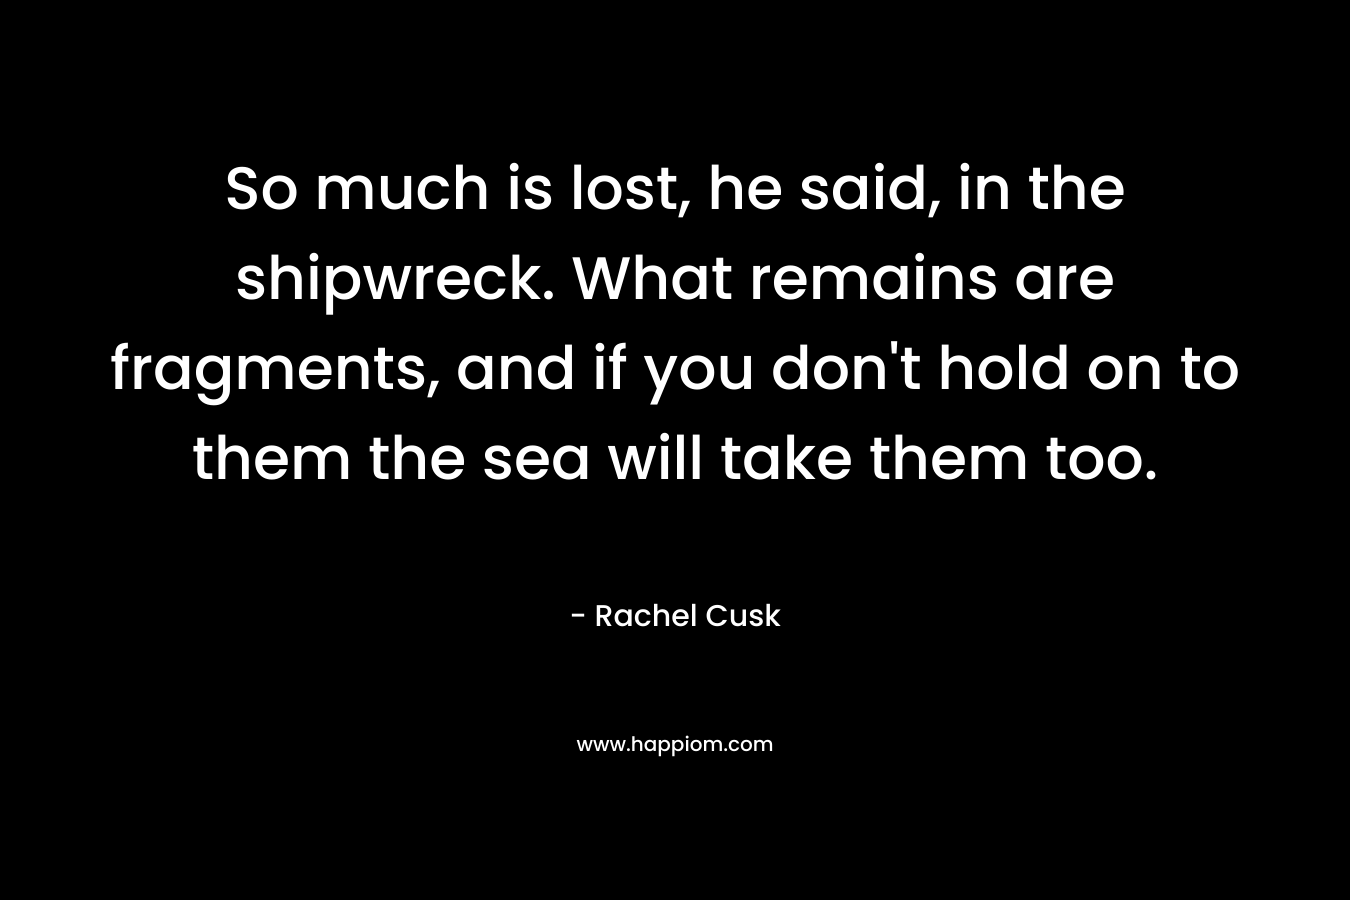 So much is lost, he said, in the shipwreck. What remains are fragments, and if you don’t hold on to them the sea will take them too. – Rachel Cusk